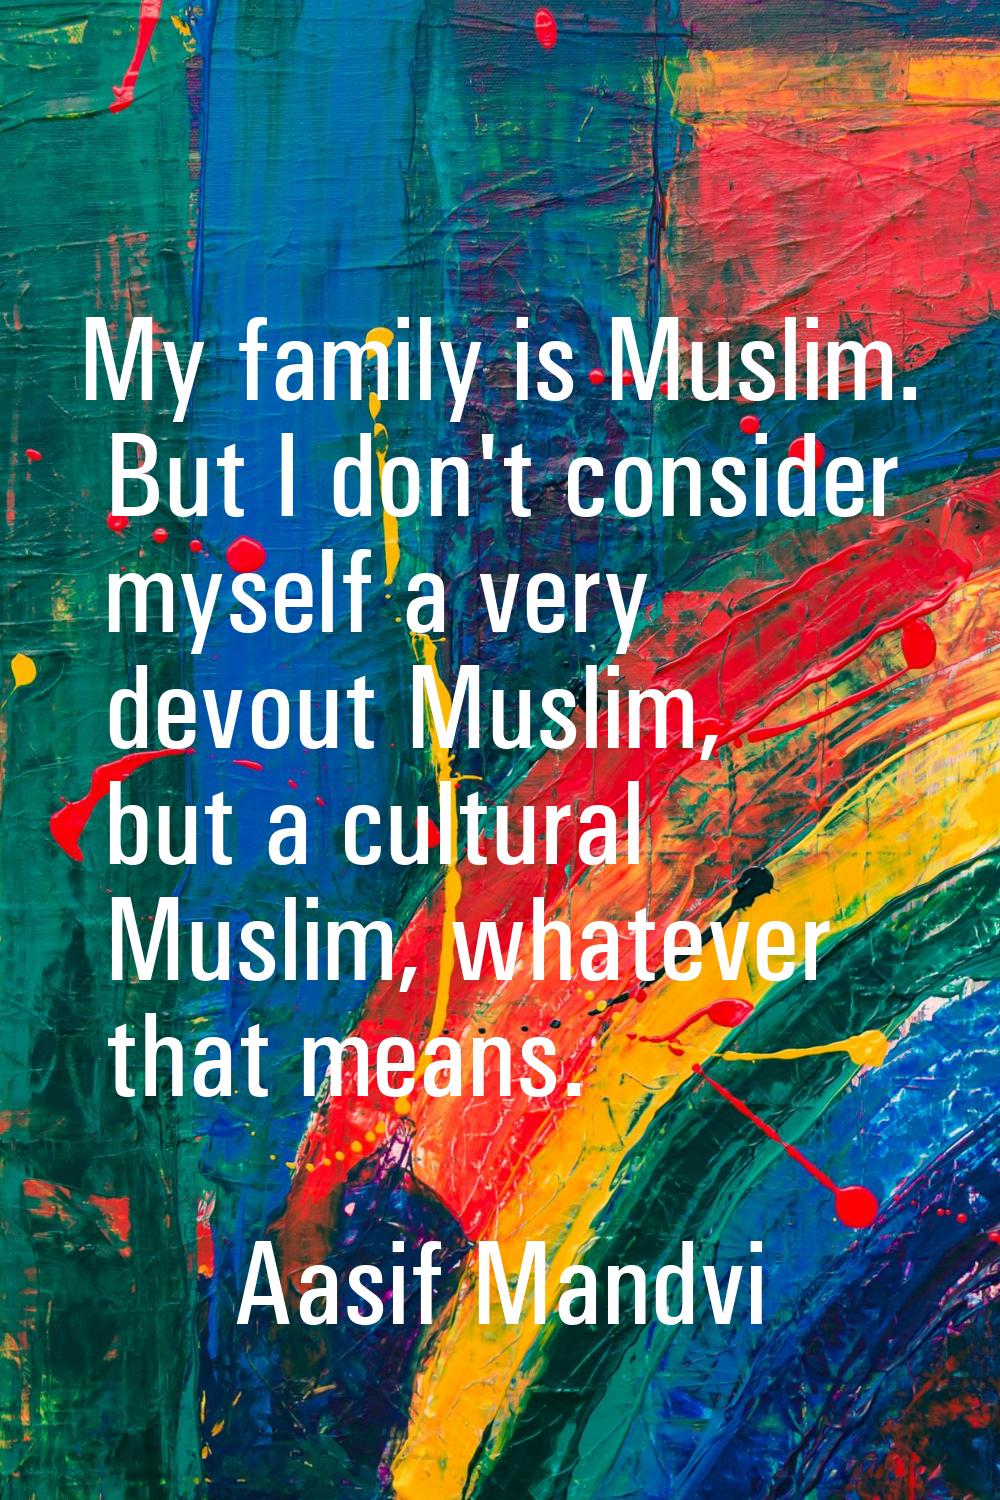 My family is Muslim. But I don't consider myself a very devout Muslim, but a cultural Muslim, whate